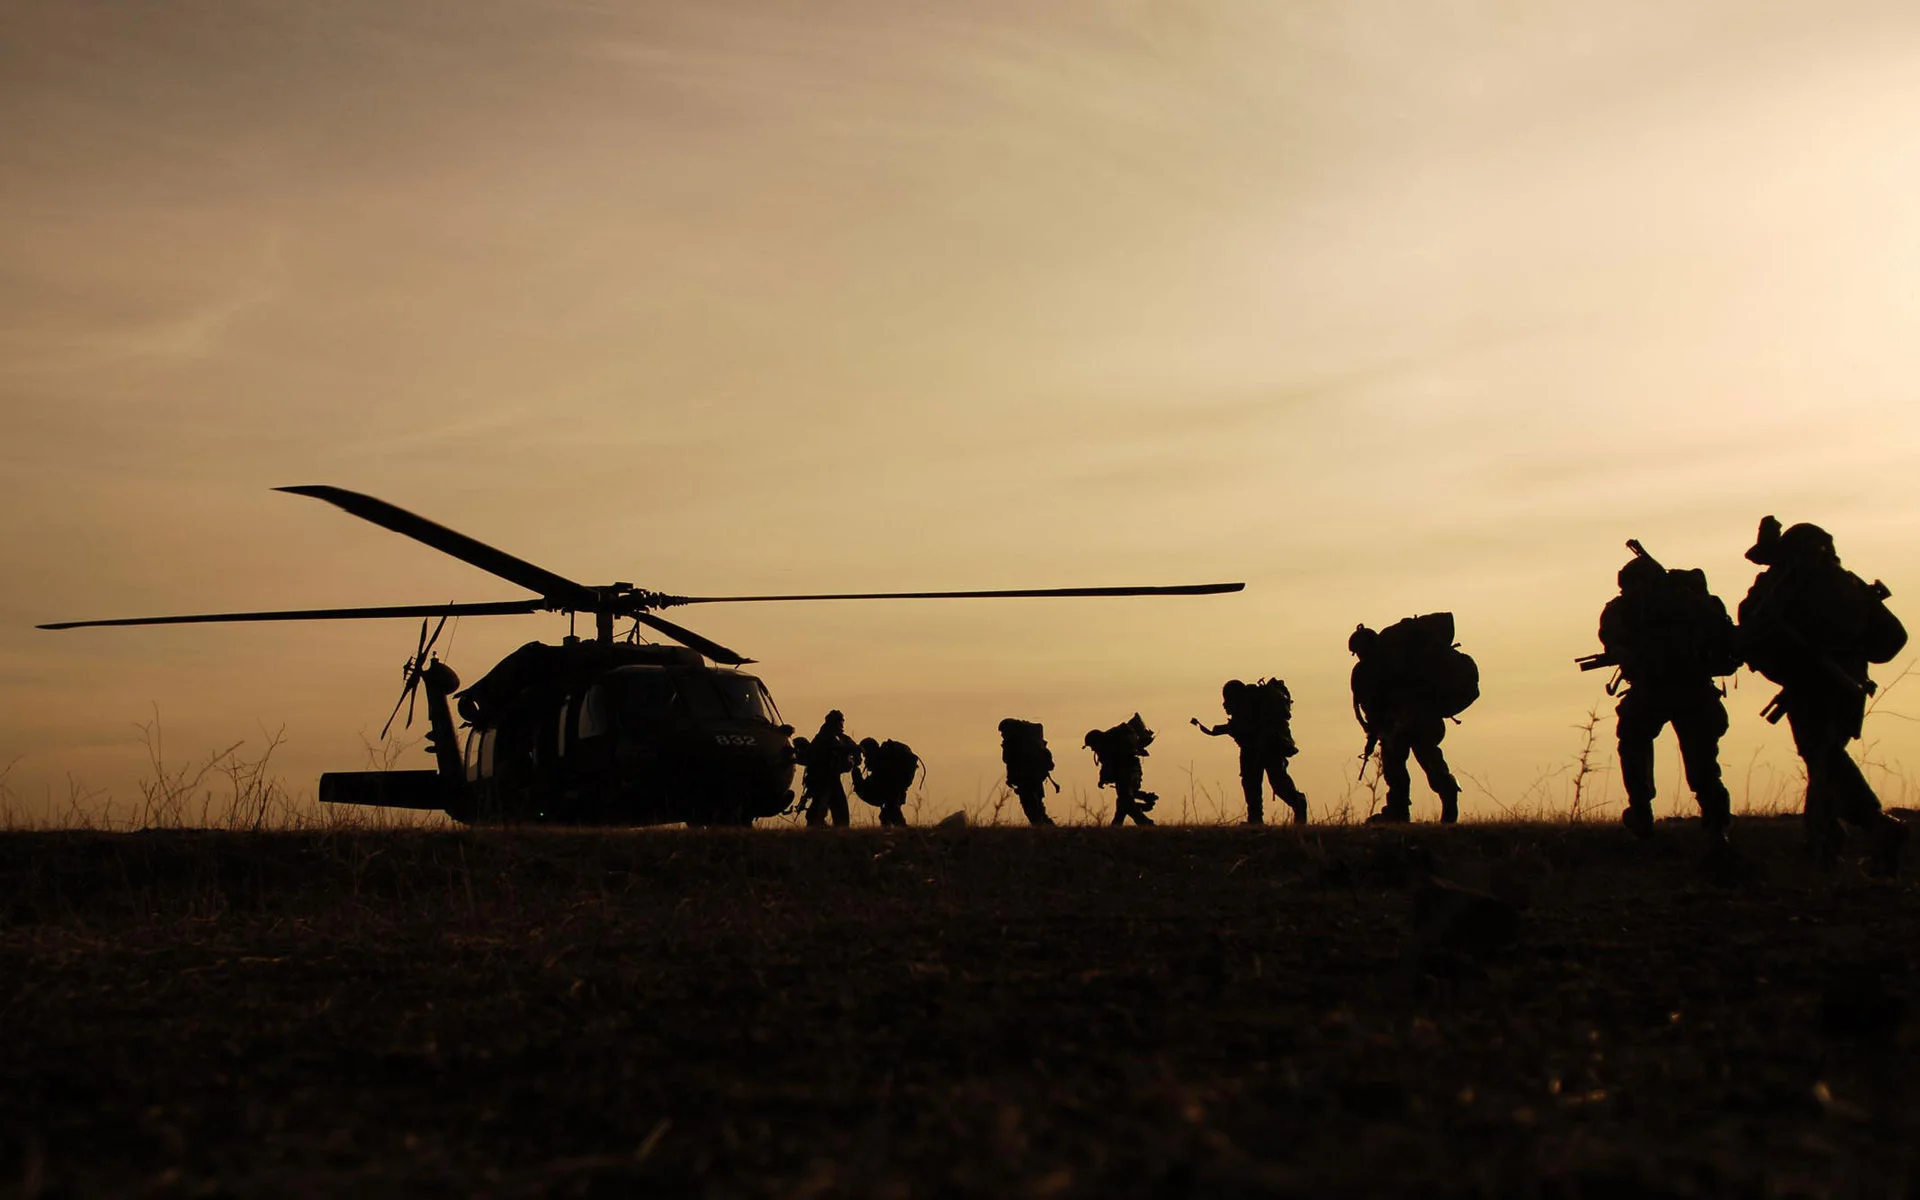 Us Army Wallpaper 9005 Hd Wallpapers in War n Army – Imagesci.com